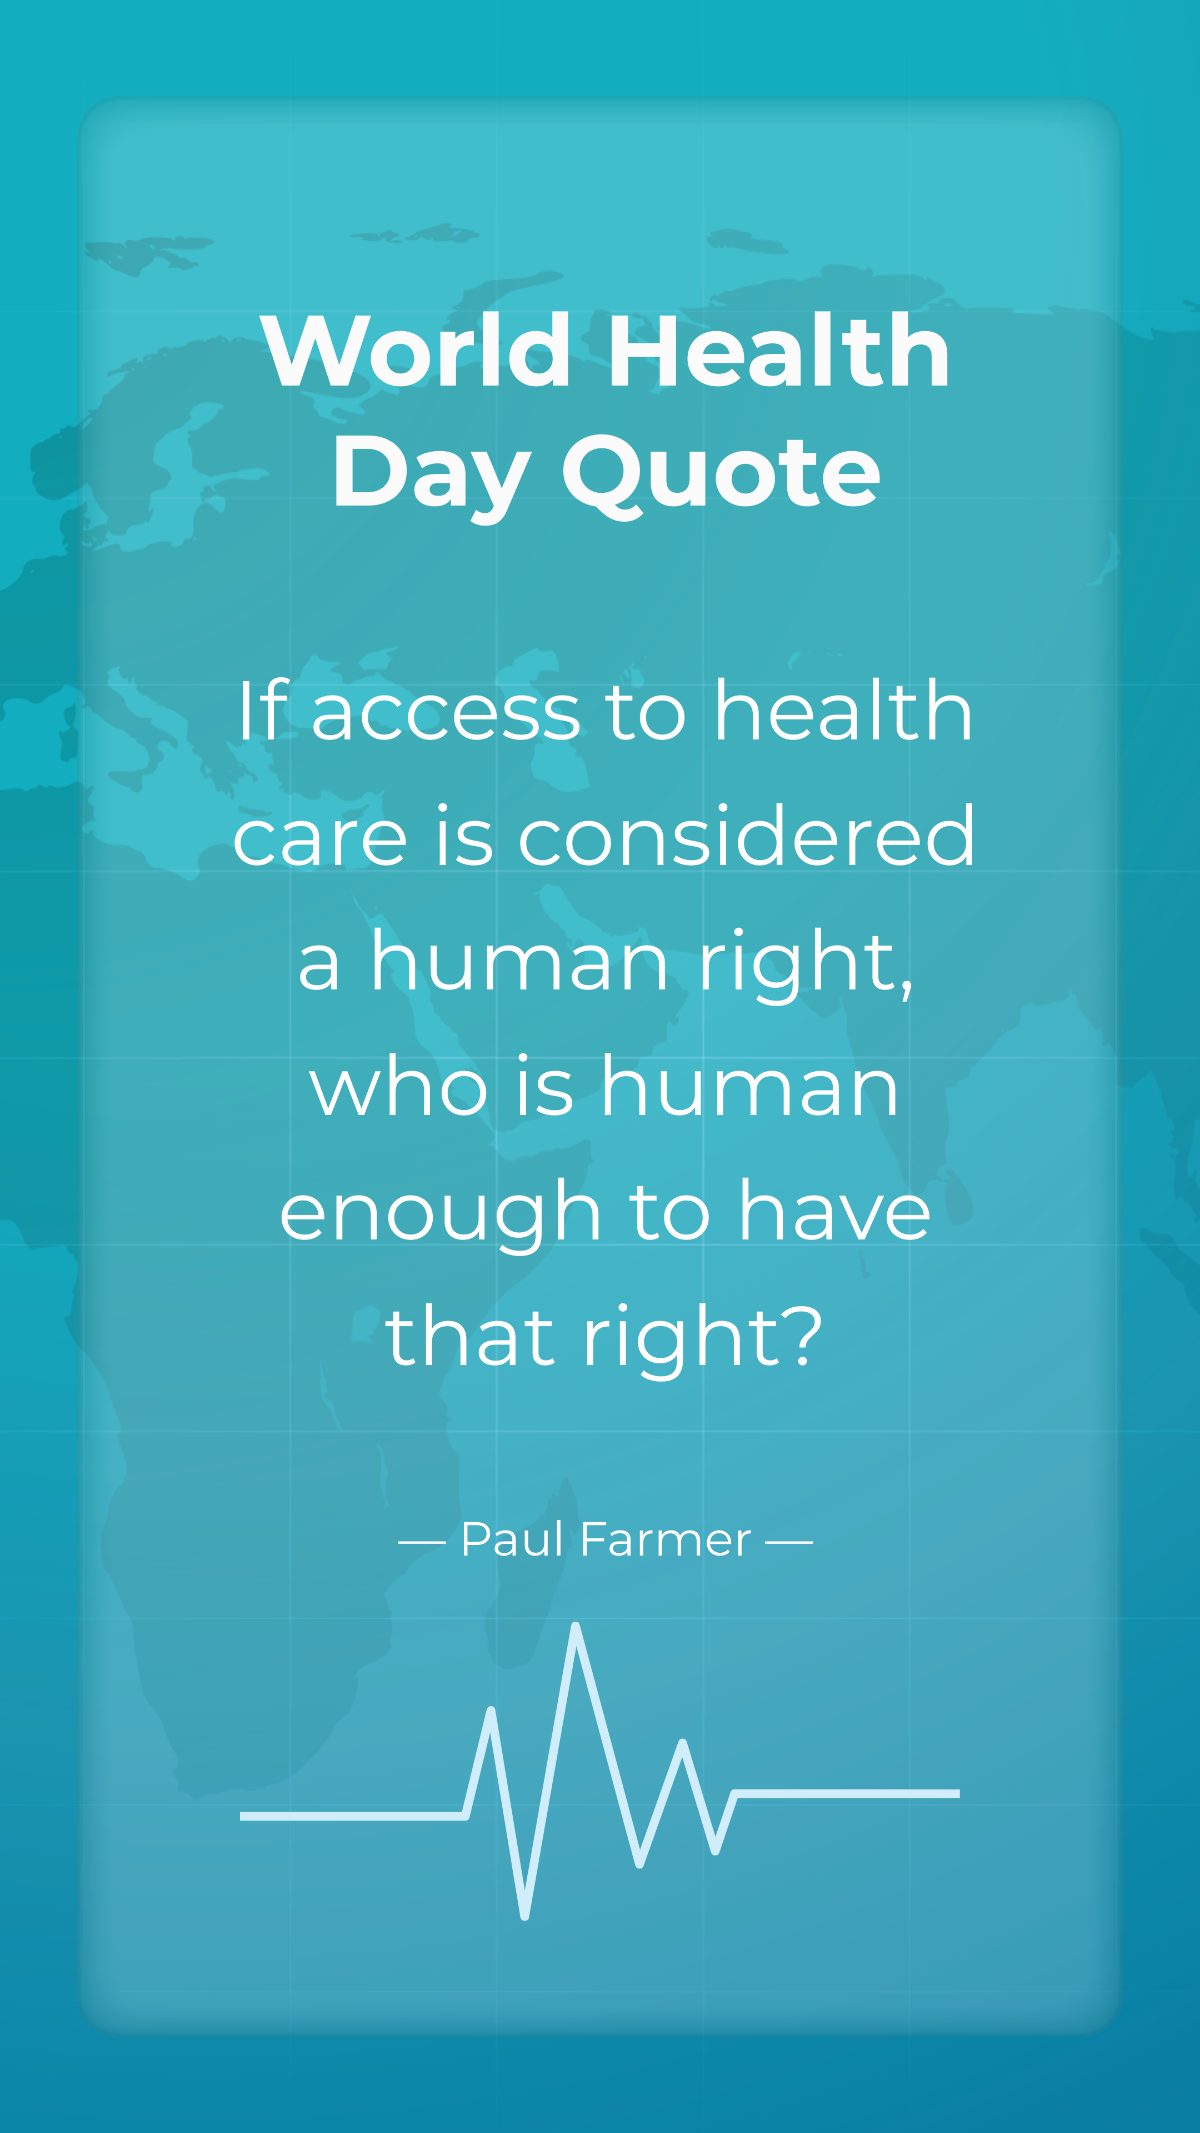 World Health Day Quote Template